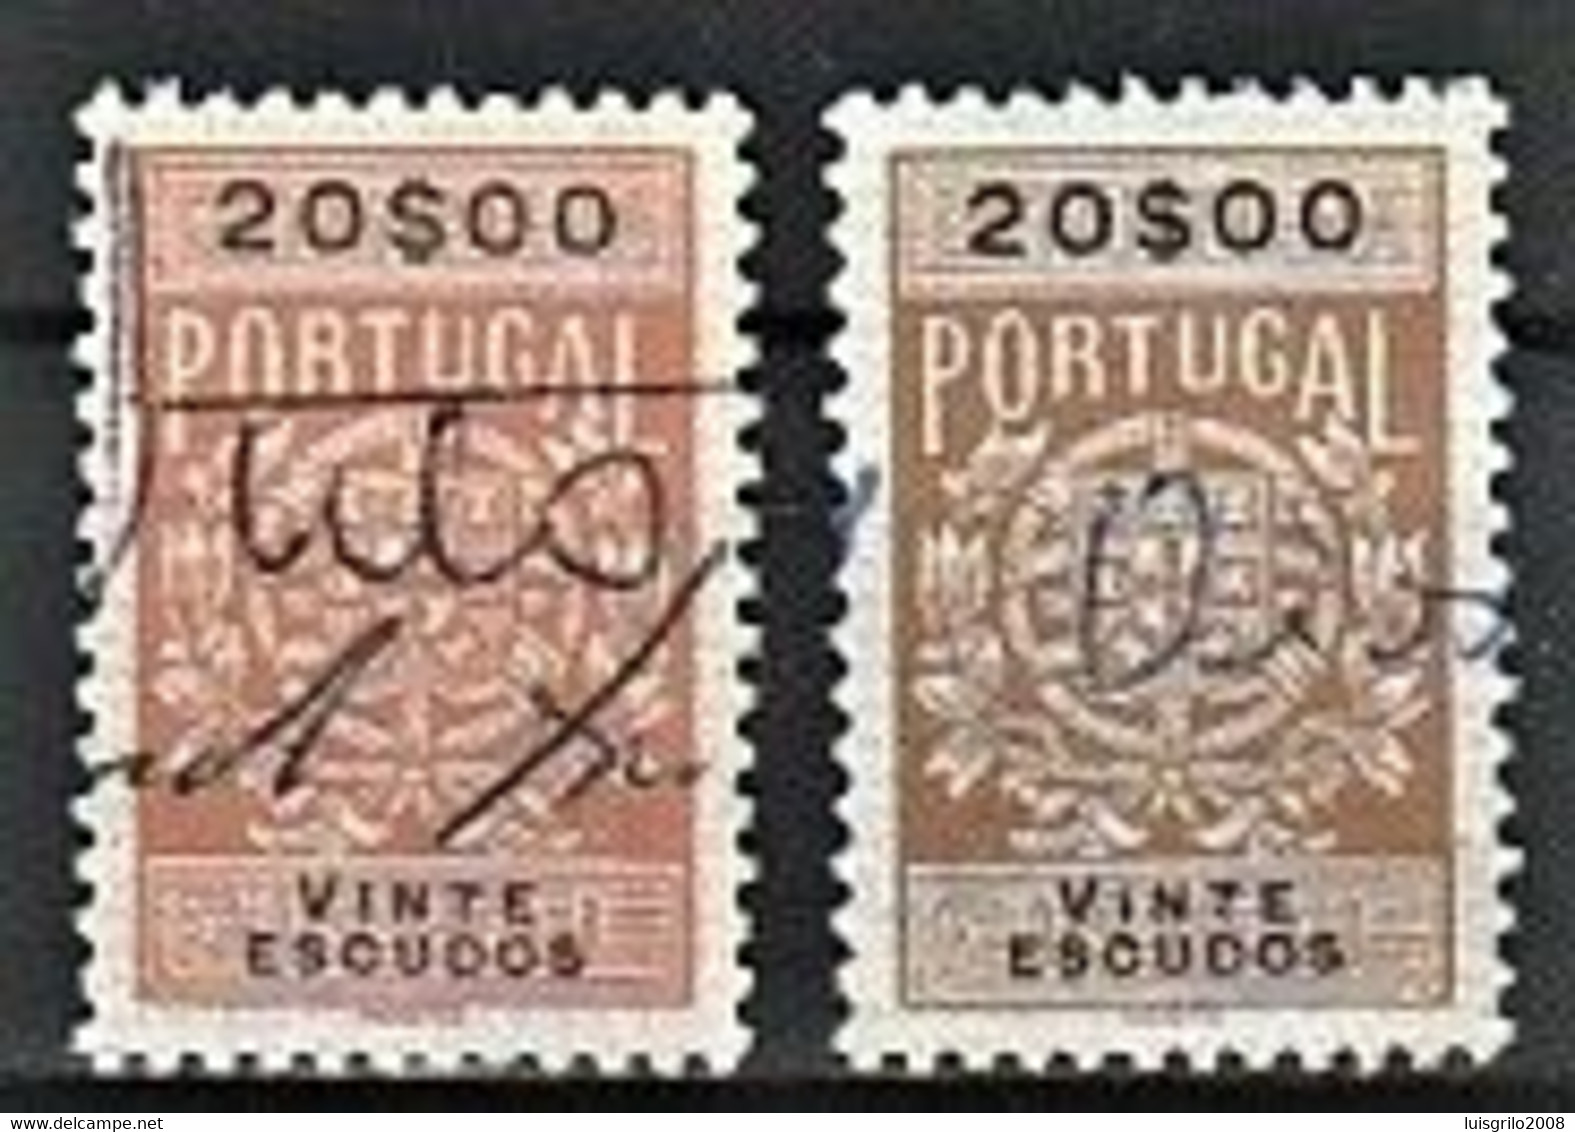 Fiscal/ Revenue, Portugal 1940 - Estampilha Fiscal -|- 20$00 - COLOR VARIANT - Is The Stamp Of The Right - Oblitérés